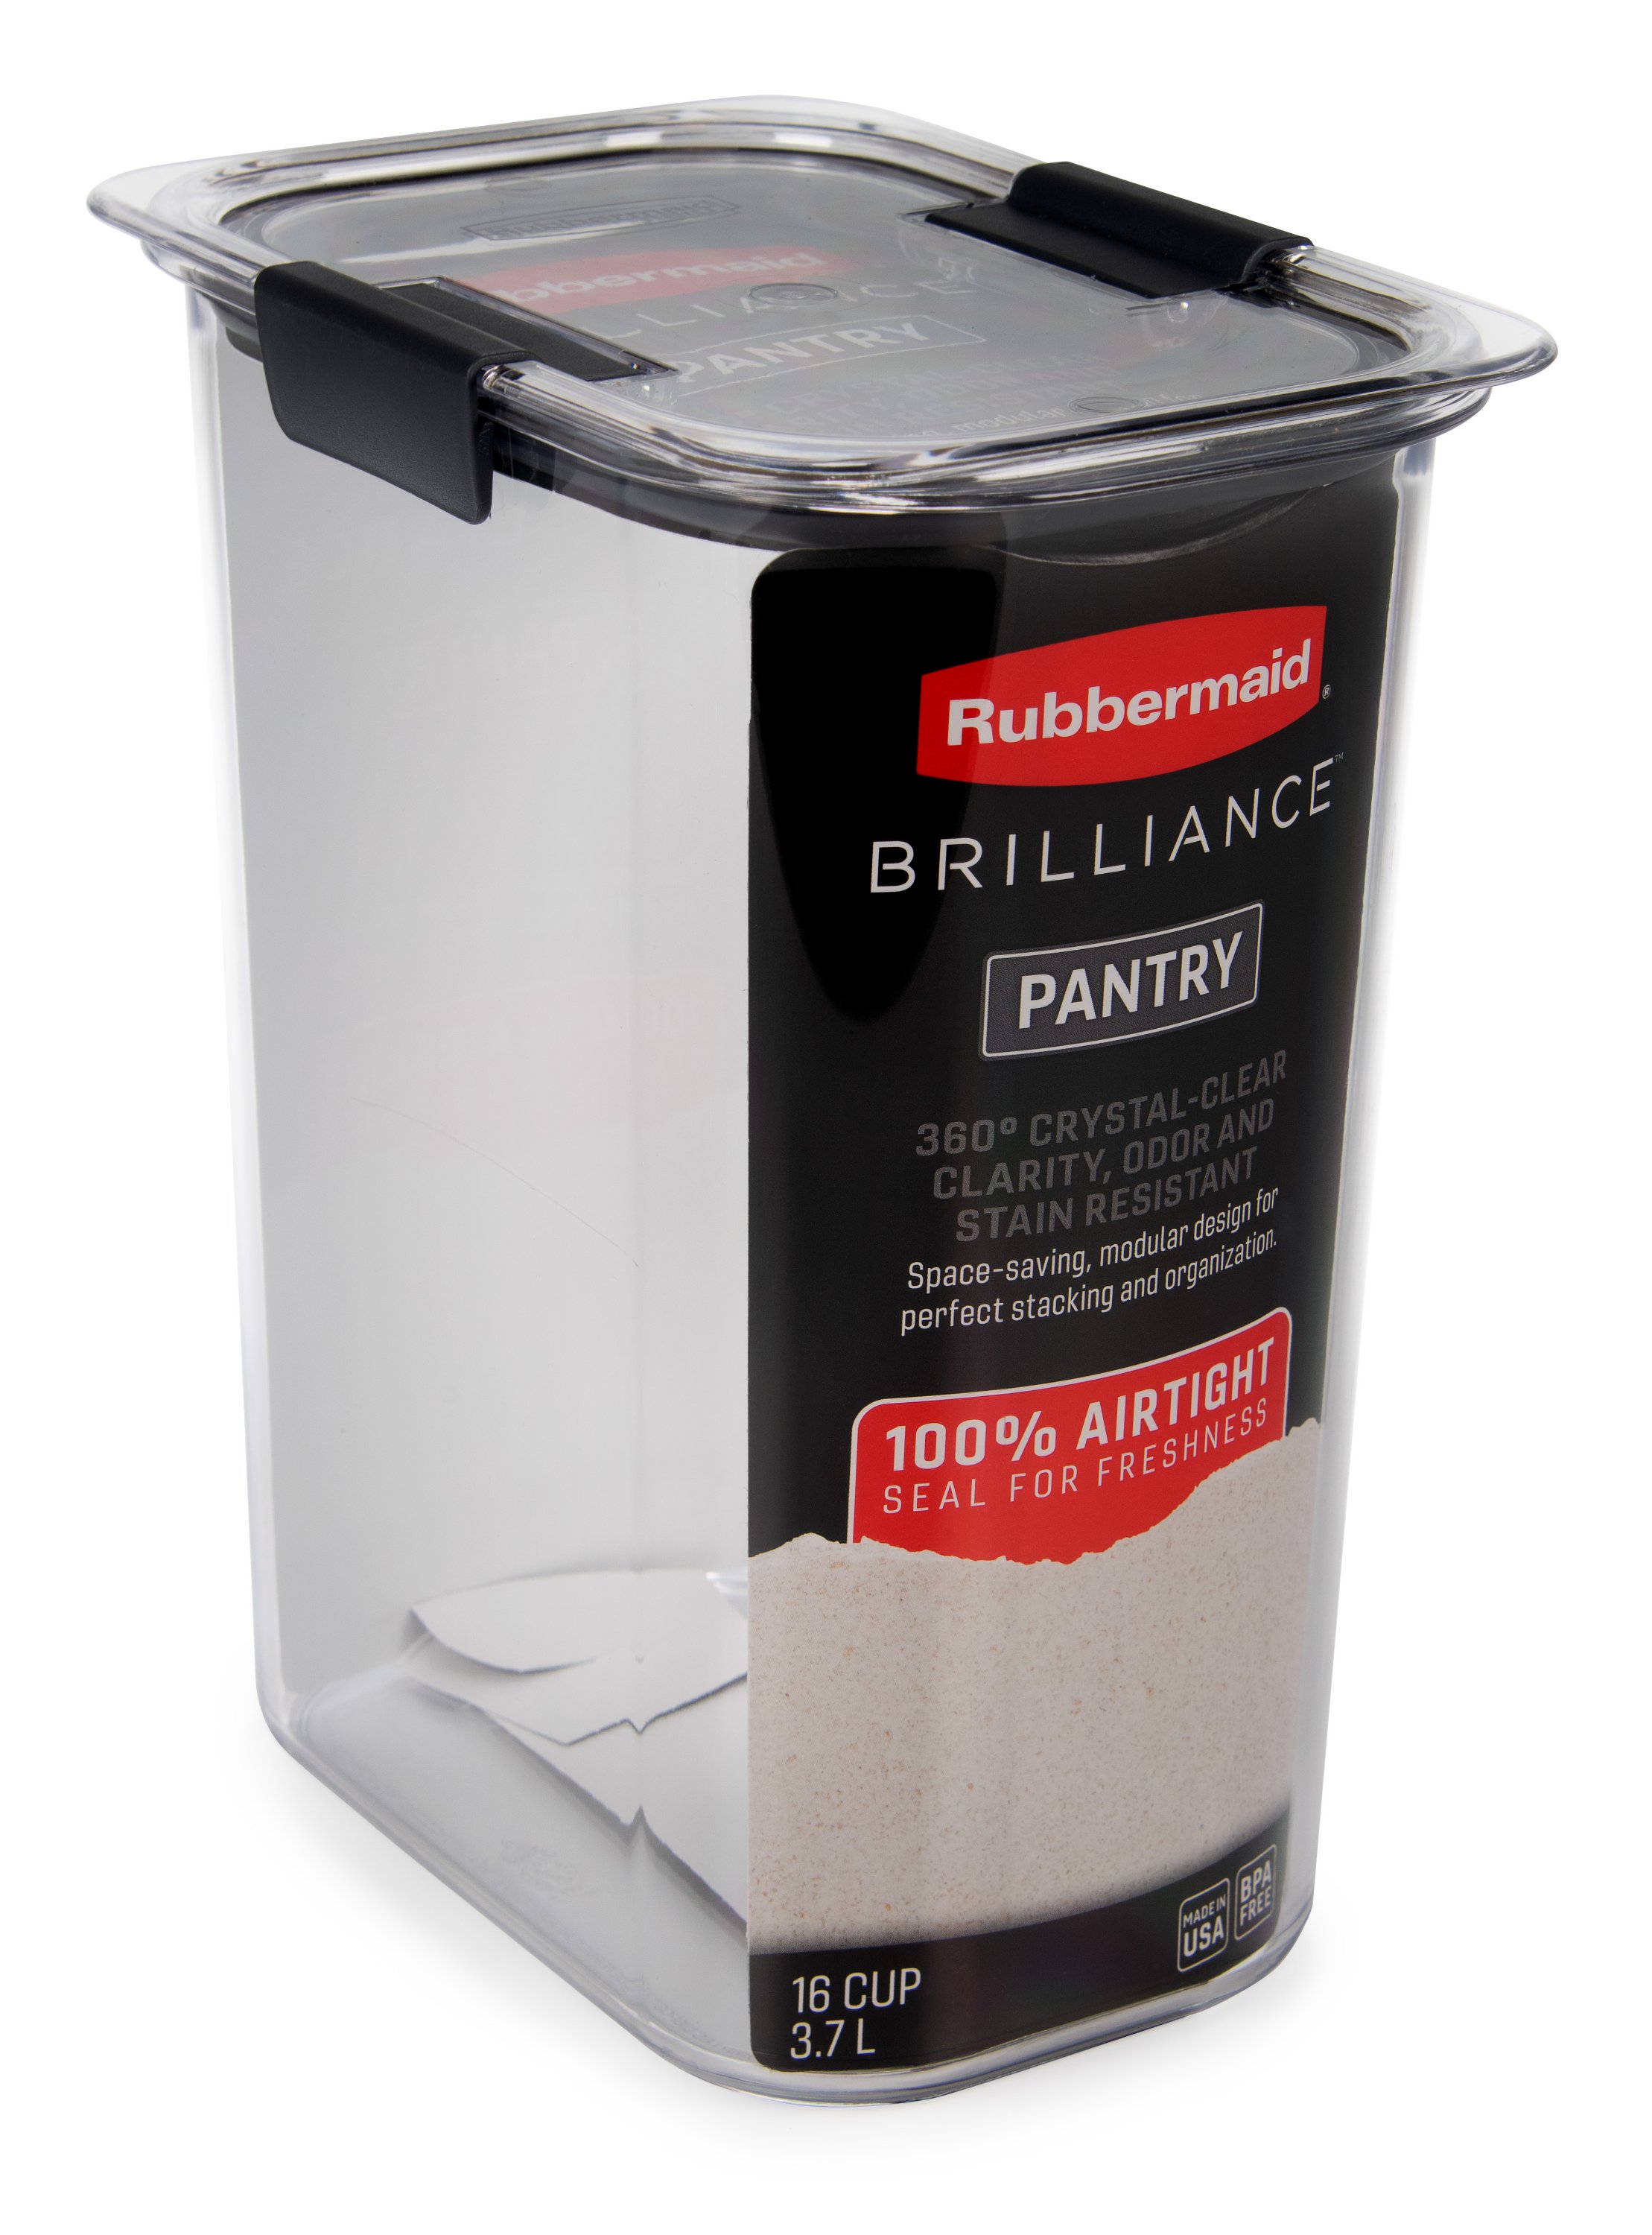  Rubbermaid Brilliance Pantry 16 and 7.8 Cup Baking Storage  Container Bundle, Clear, 4-Piece Set (2 Bases with Lids) : Everything Else